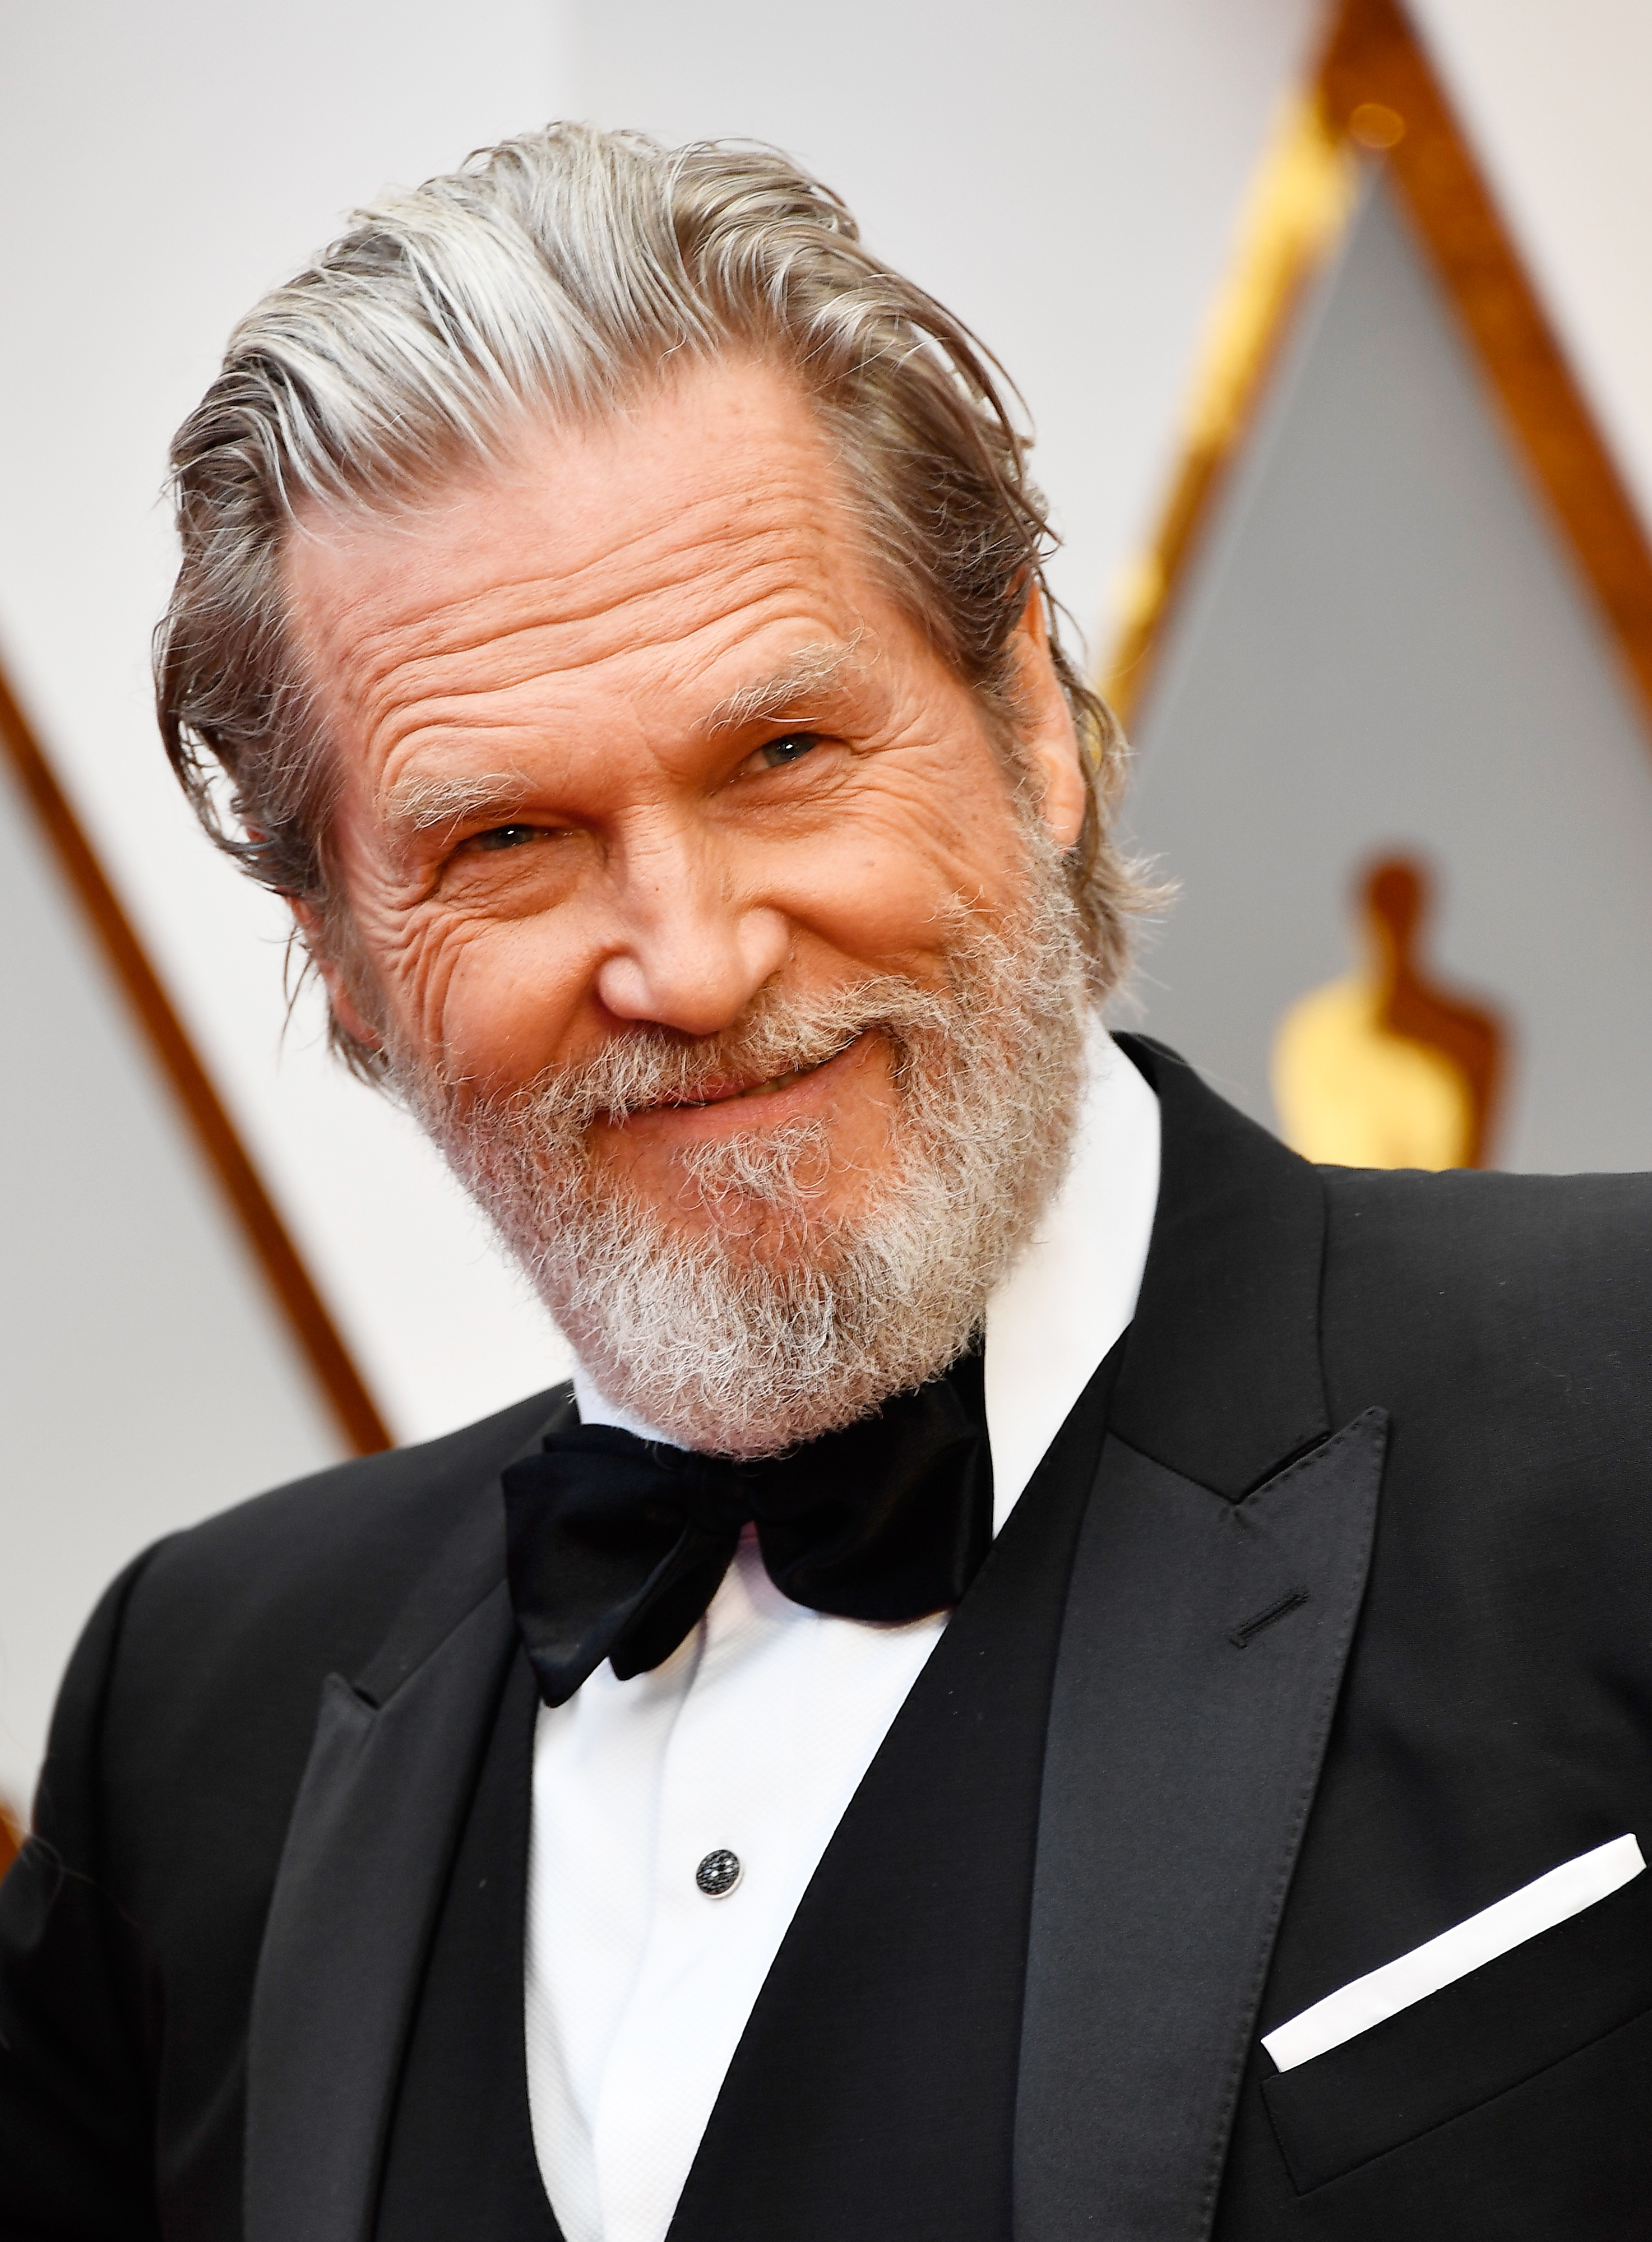 Jeff Bridges attends the 89th Annual Academy Awards at Hollywood & Highland Center on February 26, 2017 in Hollywood, California | Source: Getty Images